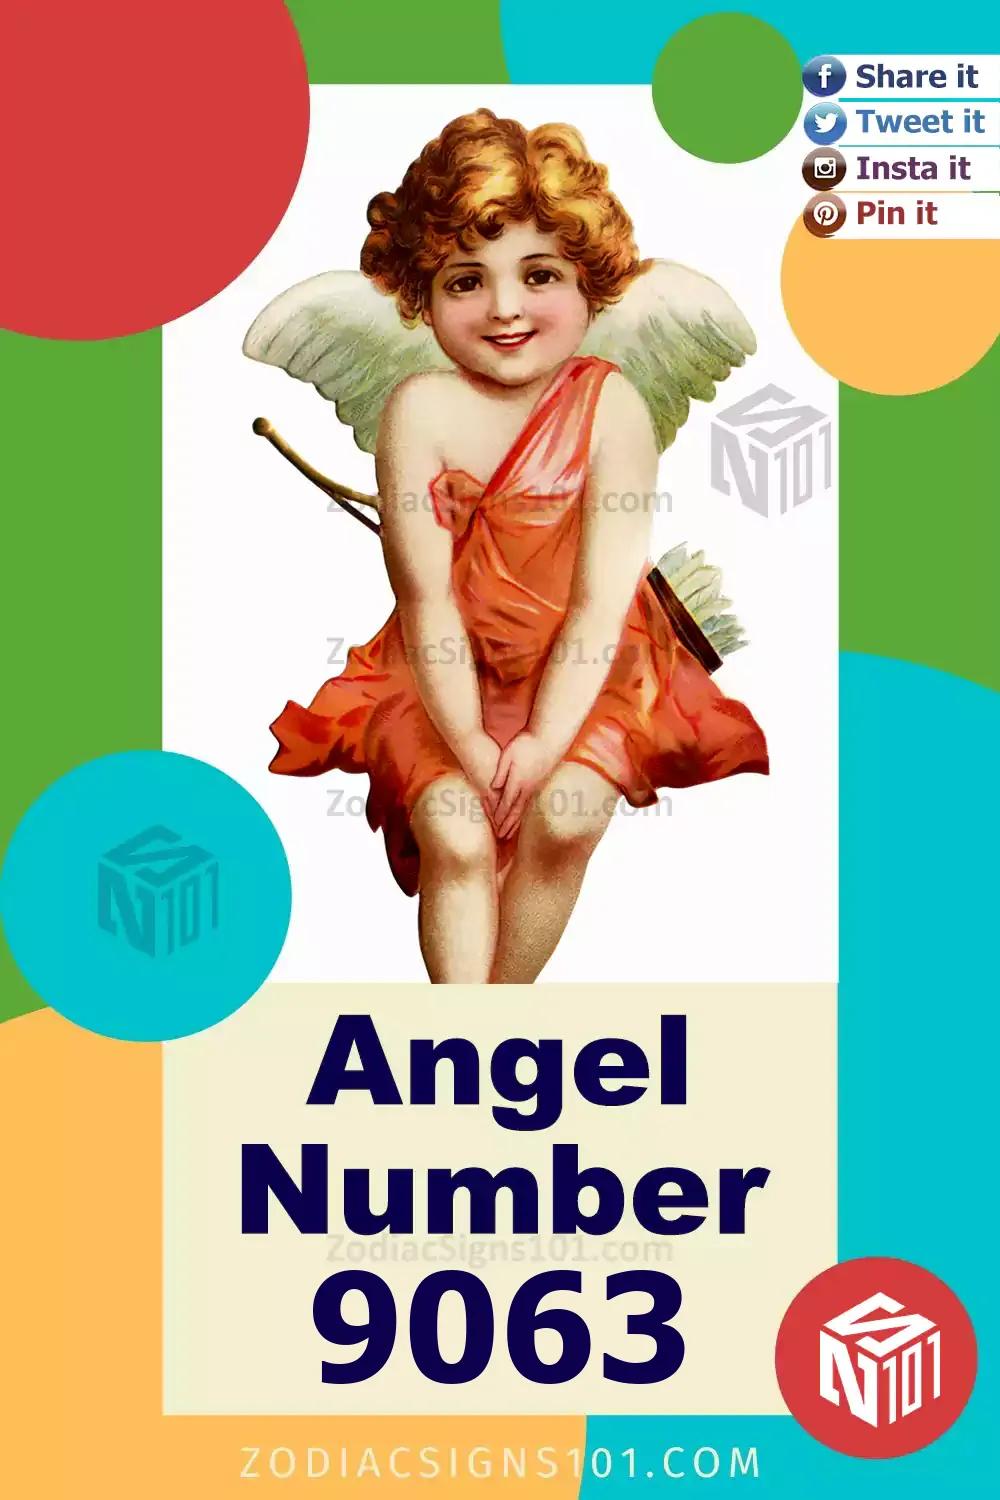 9063 Angel Number Meaning